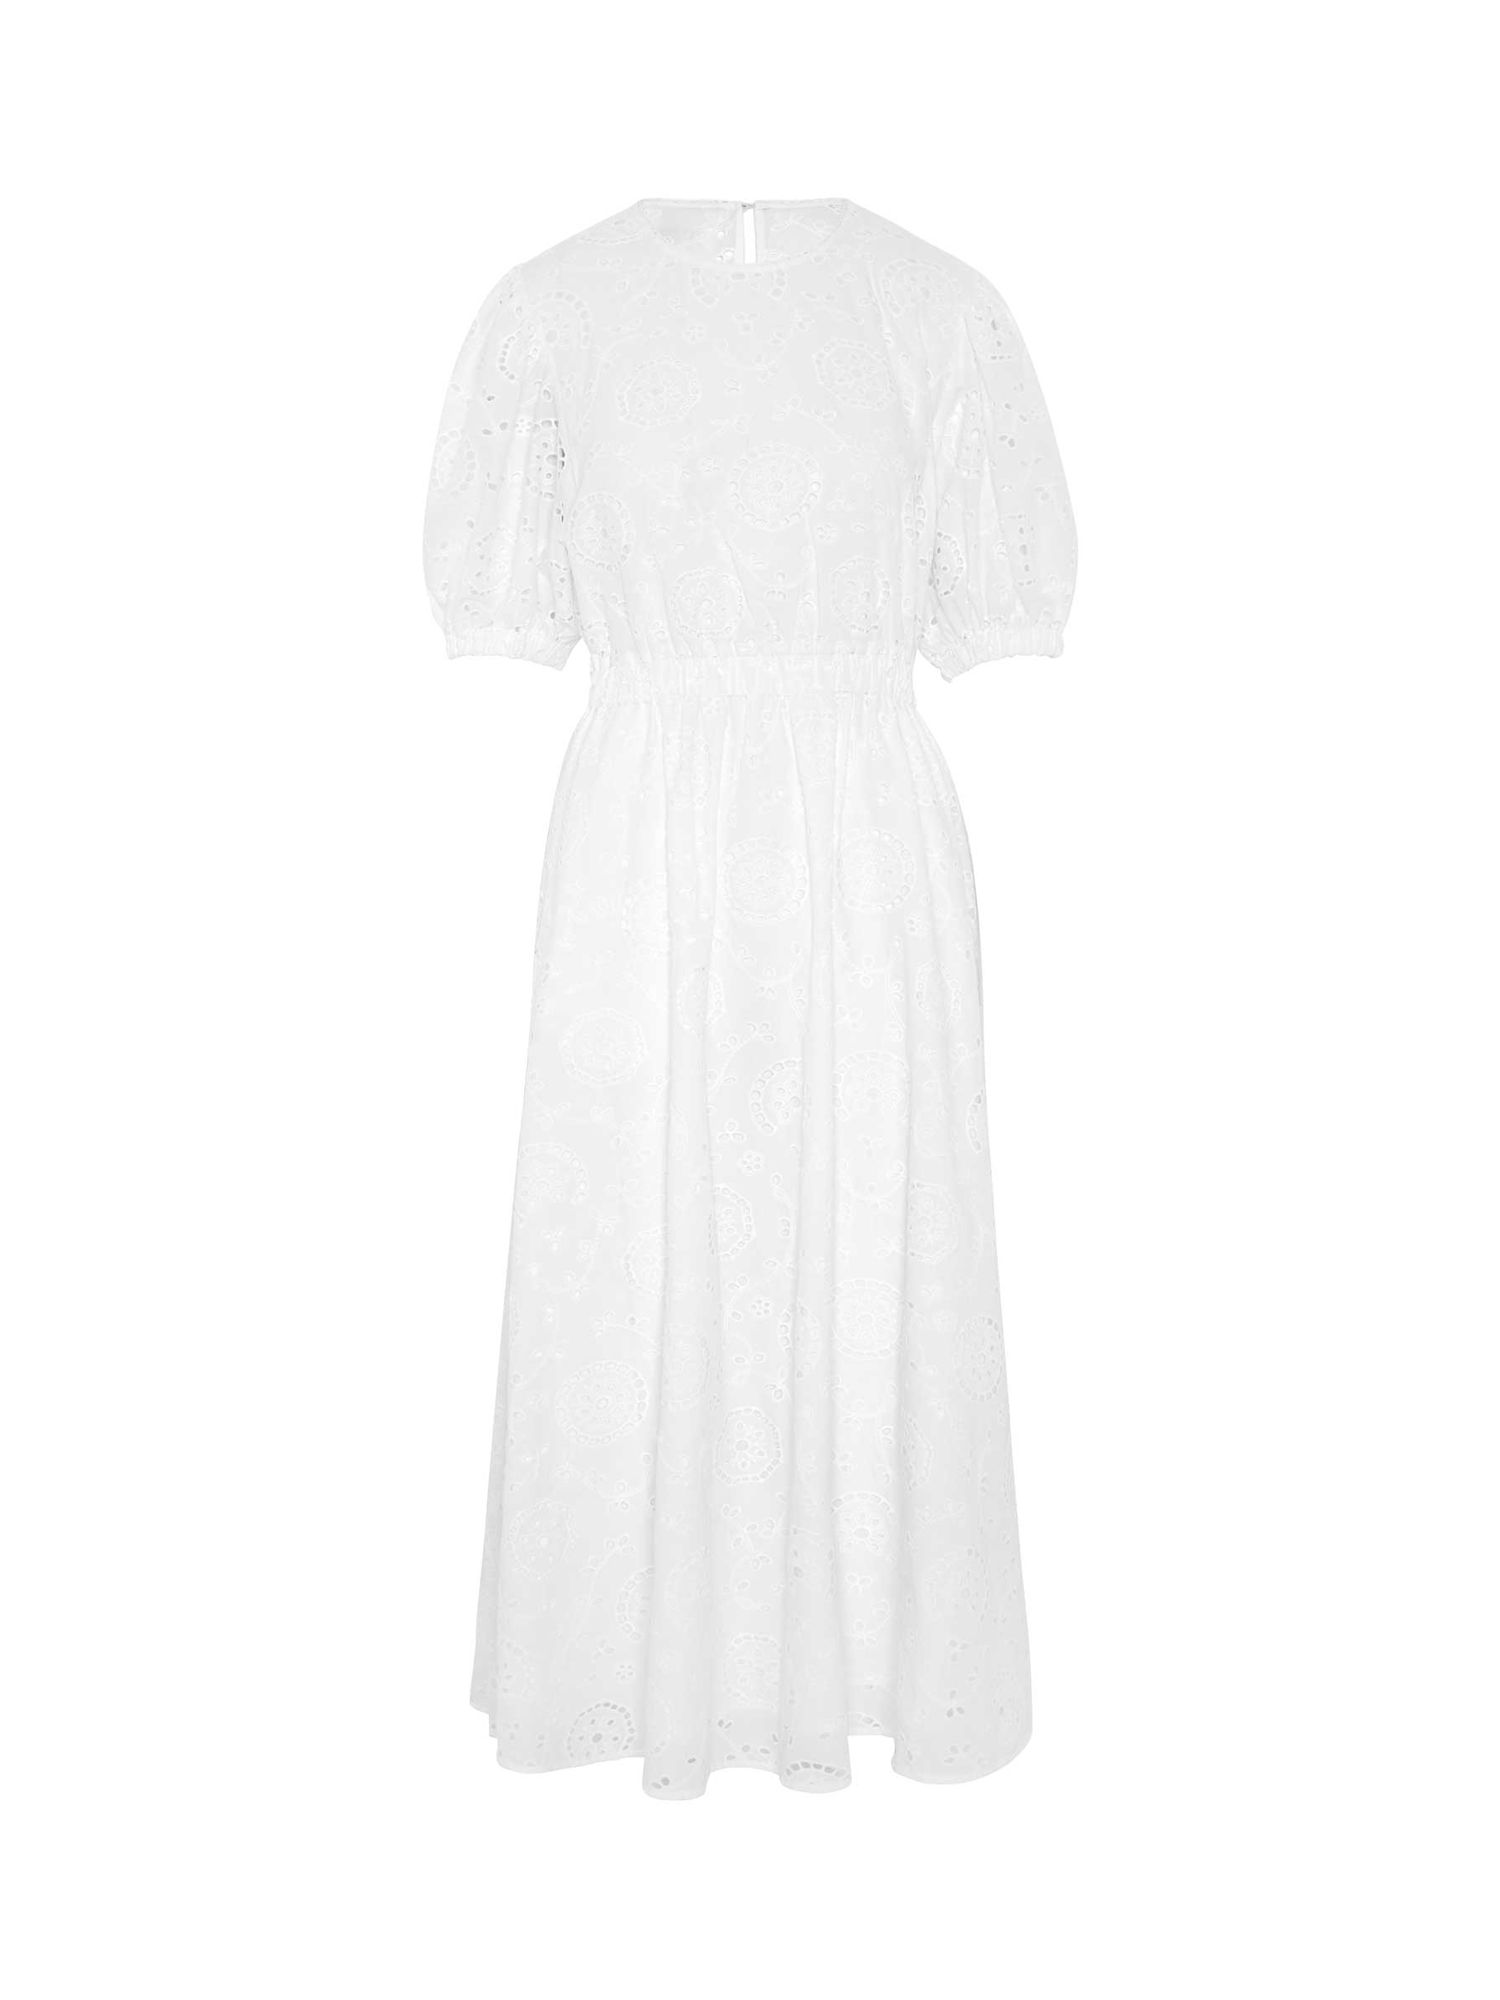 Vivere By Savannah Miller Stella Broderie Anglaise Maxi Dress, White, 6